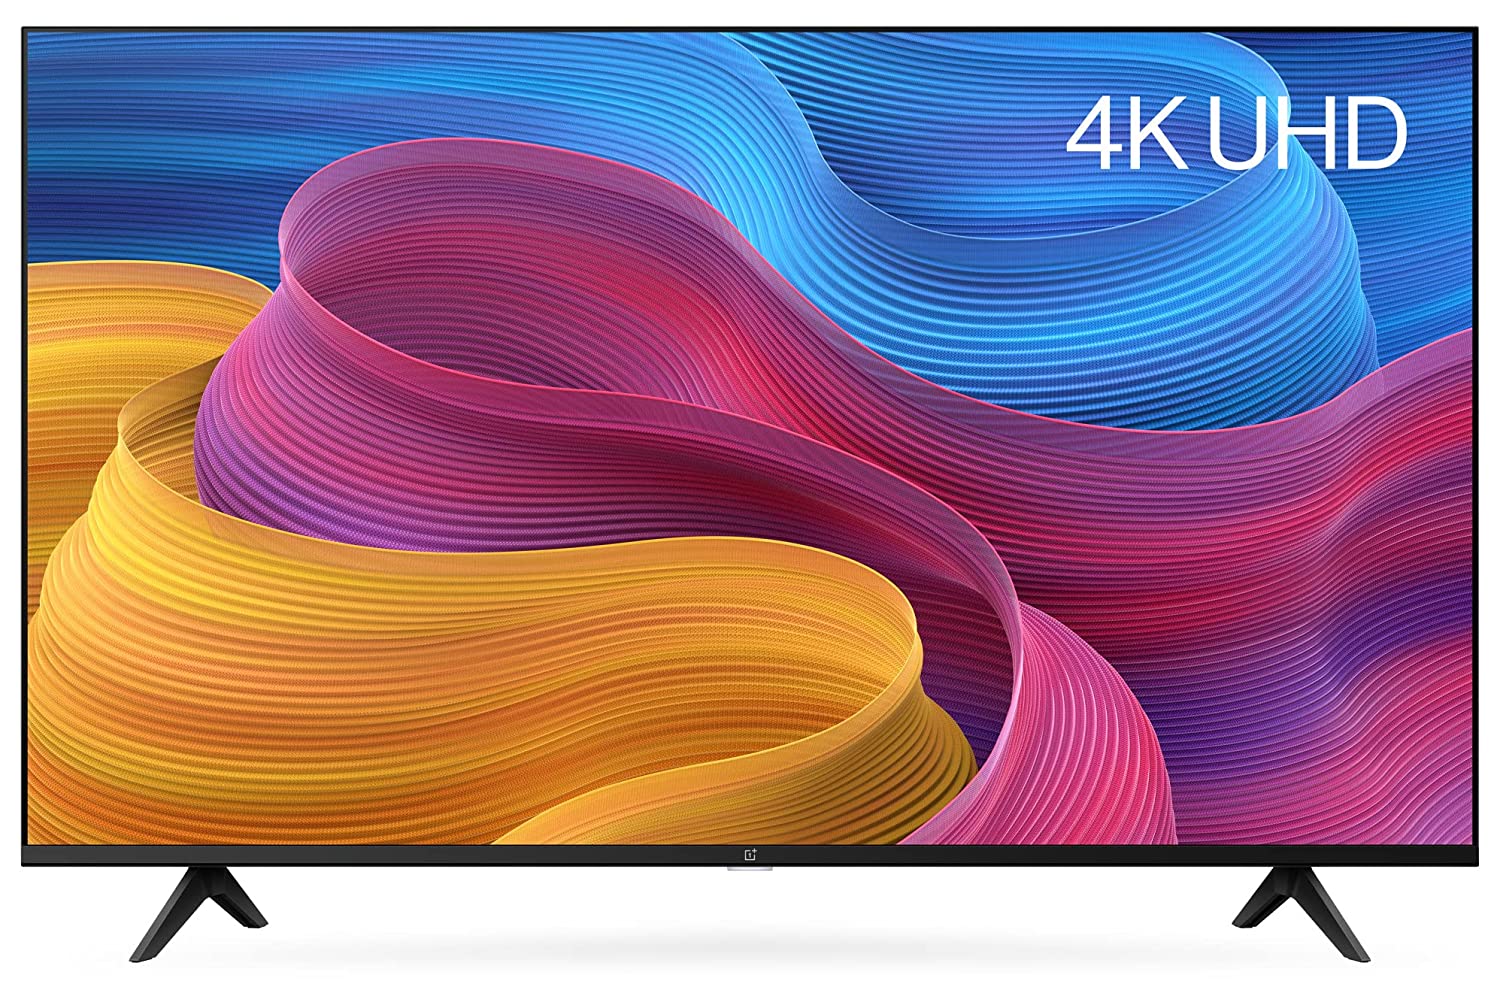 OnePlus 50 inches Y Series Android LED TV